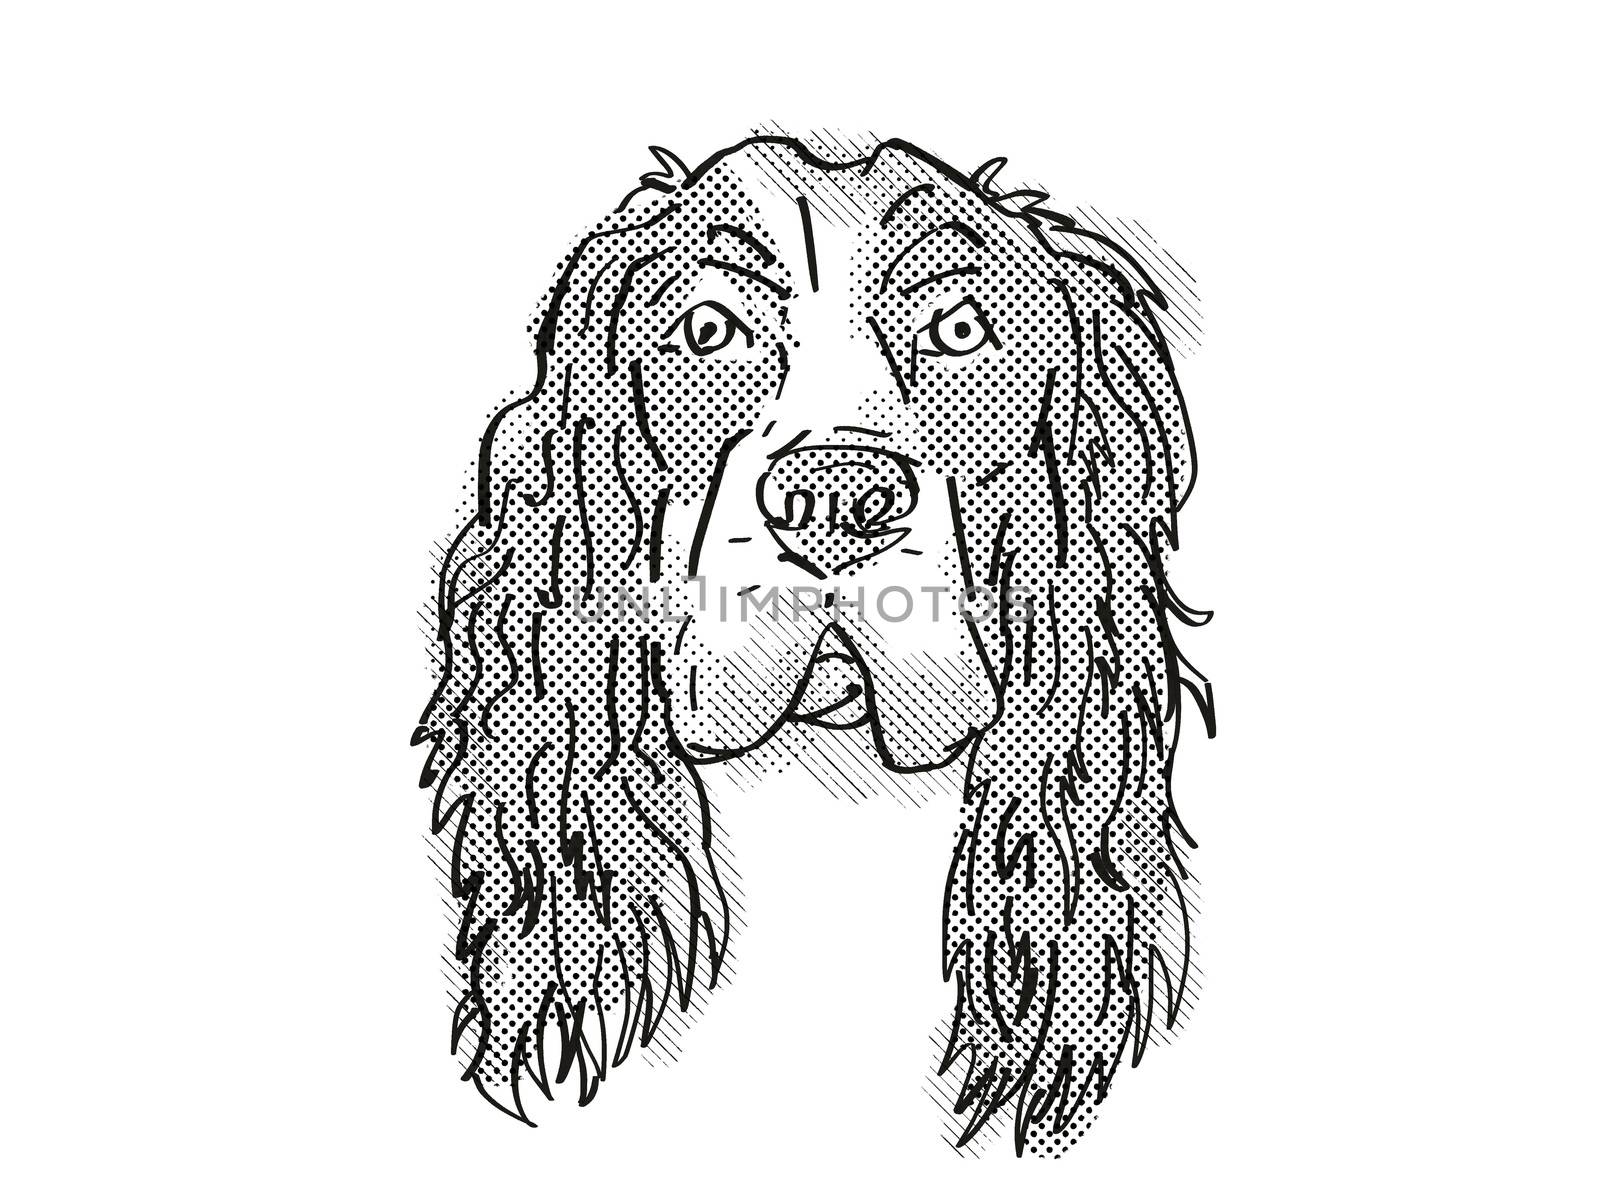 Retro cartoon style drawing of head of a English Cocker Spaniel, a domestic dog or canine breed on isolated white background done in black and white.